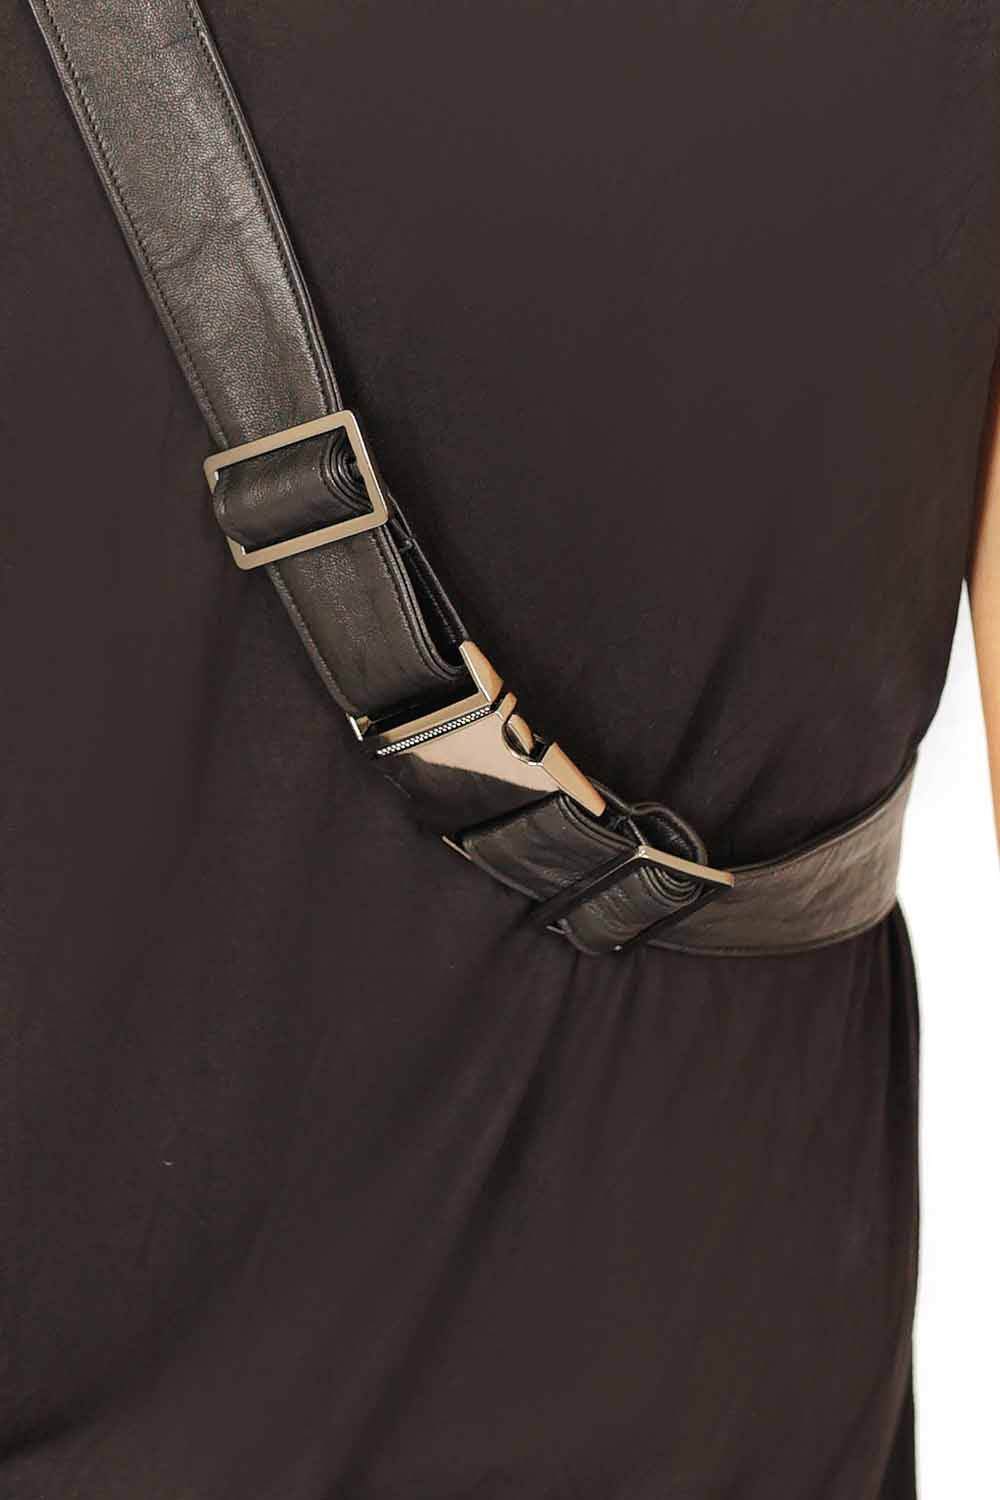 Buckle of a black leather sling bag from Love Khaos